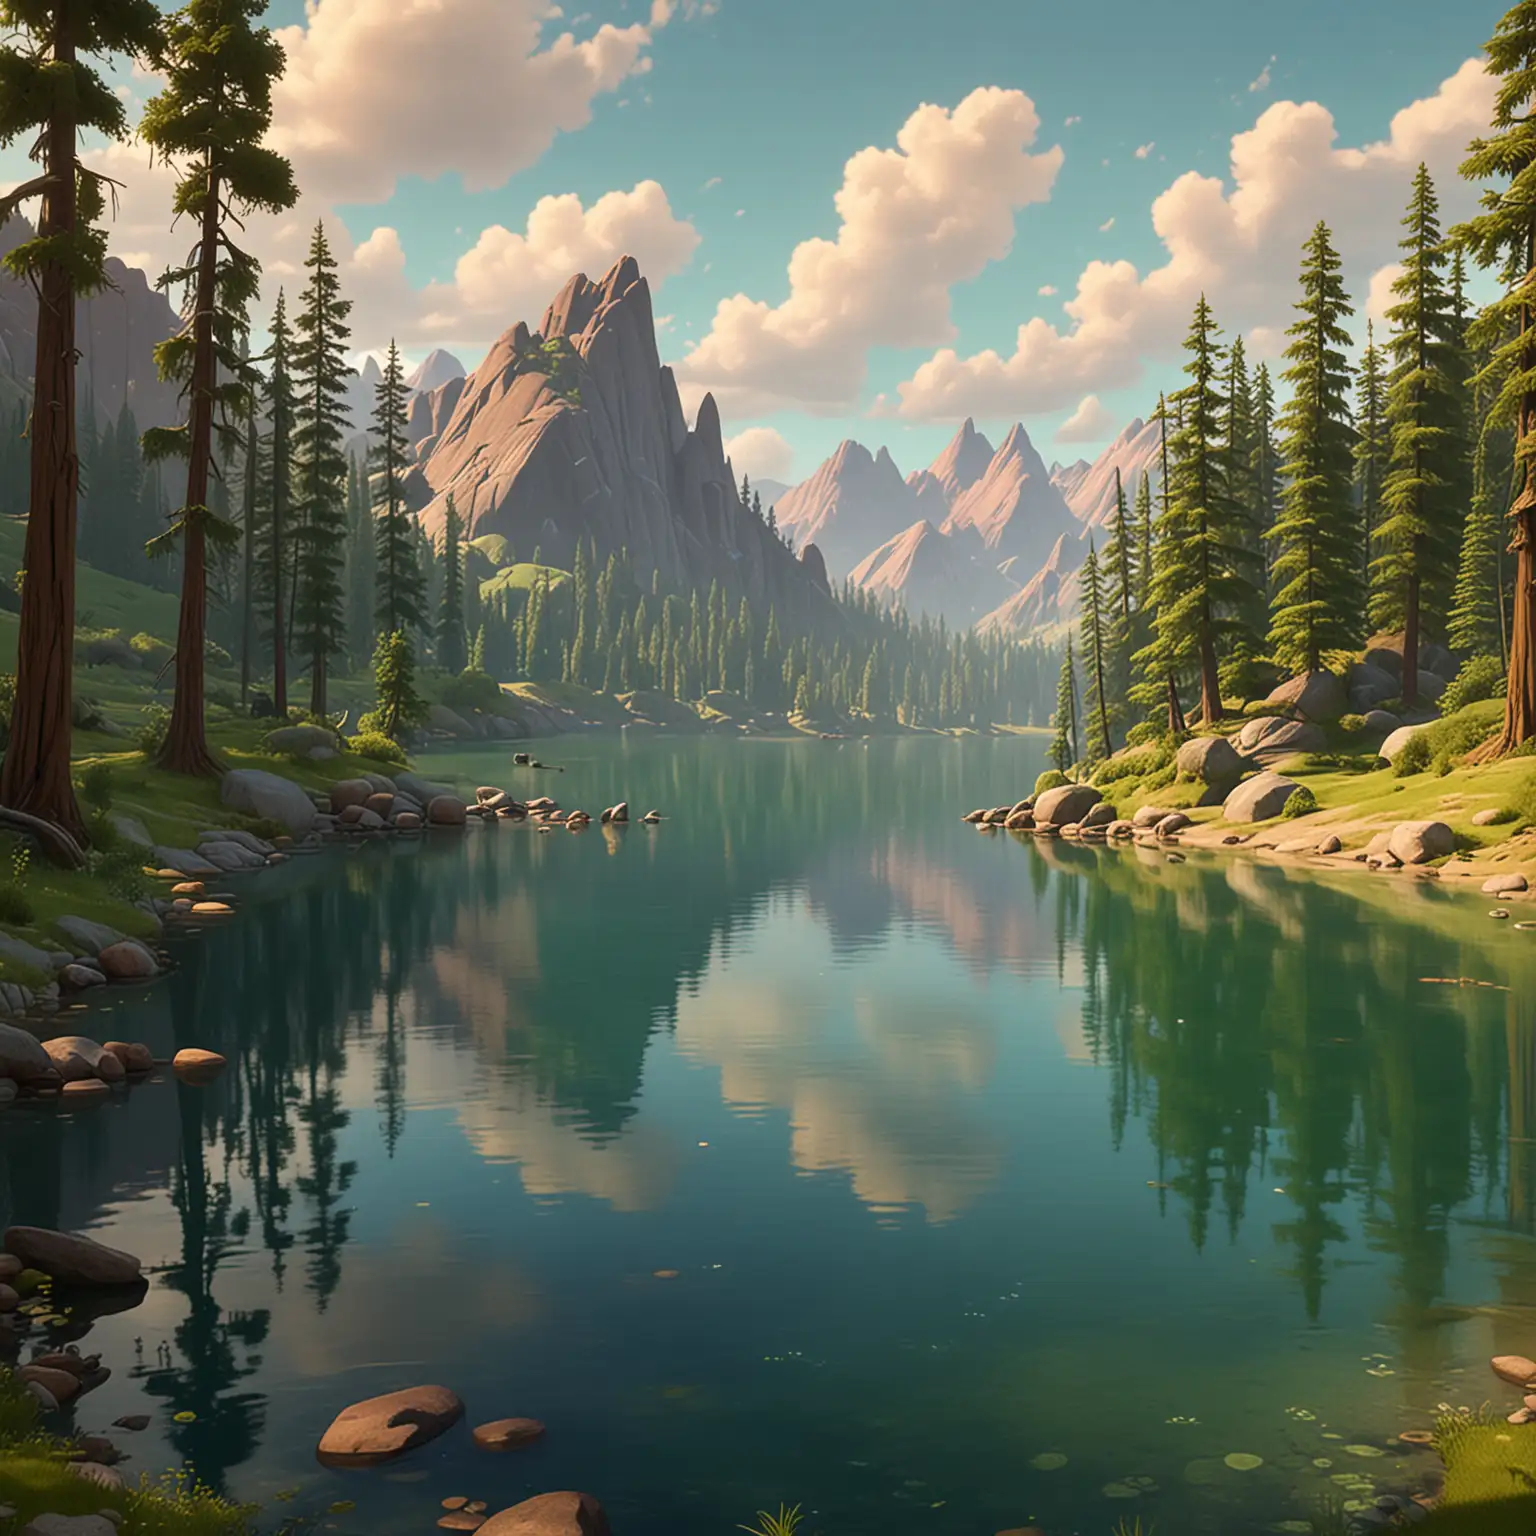 Serene Lake Landscape with Rolling Hills and Lush Trees in Pixar Style